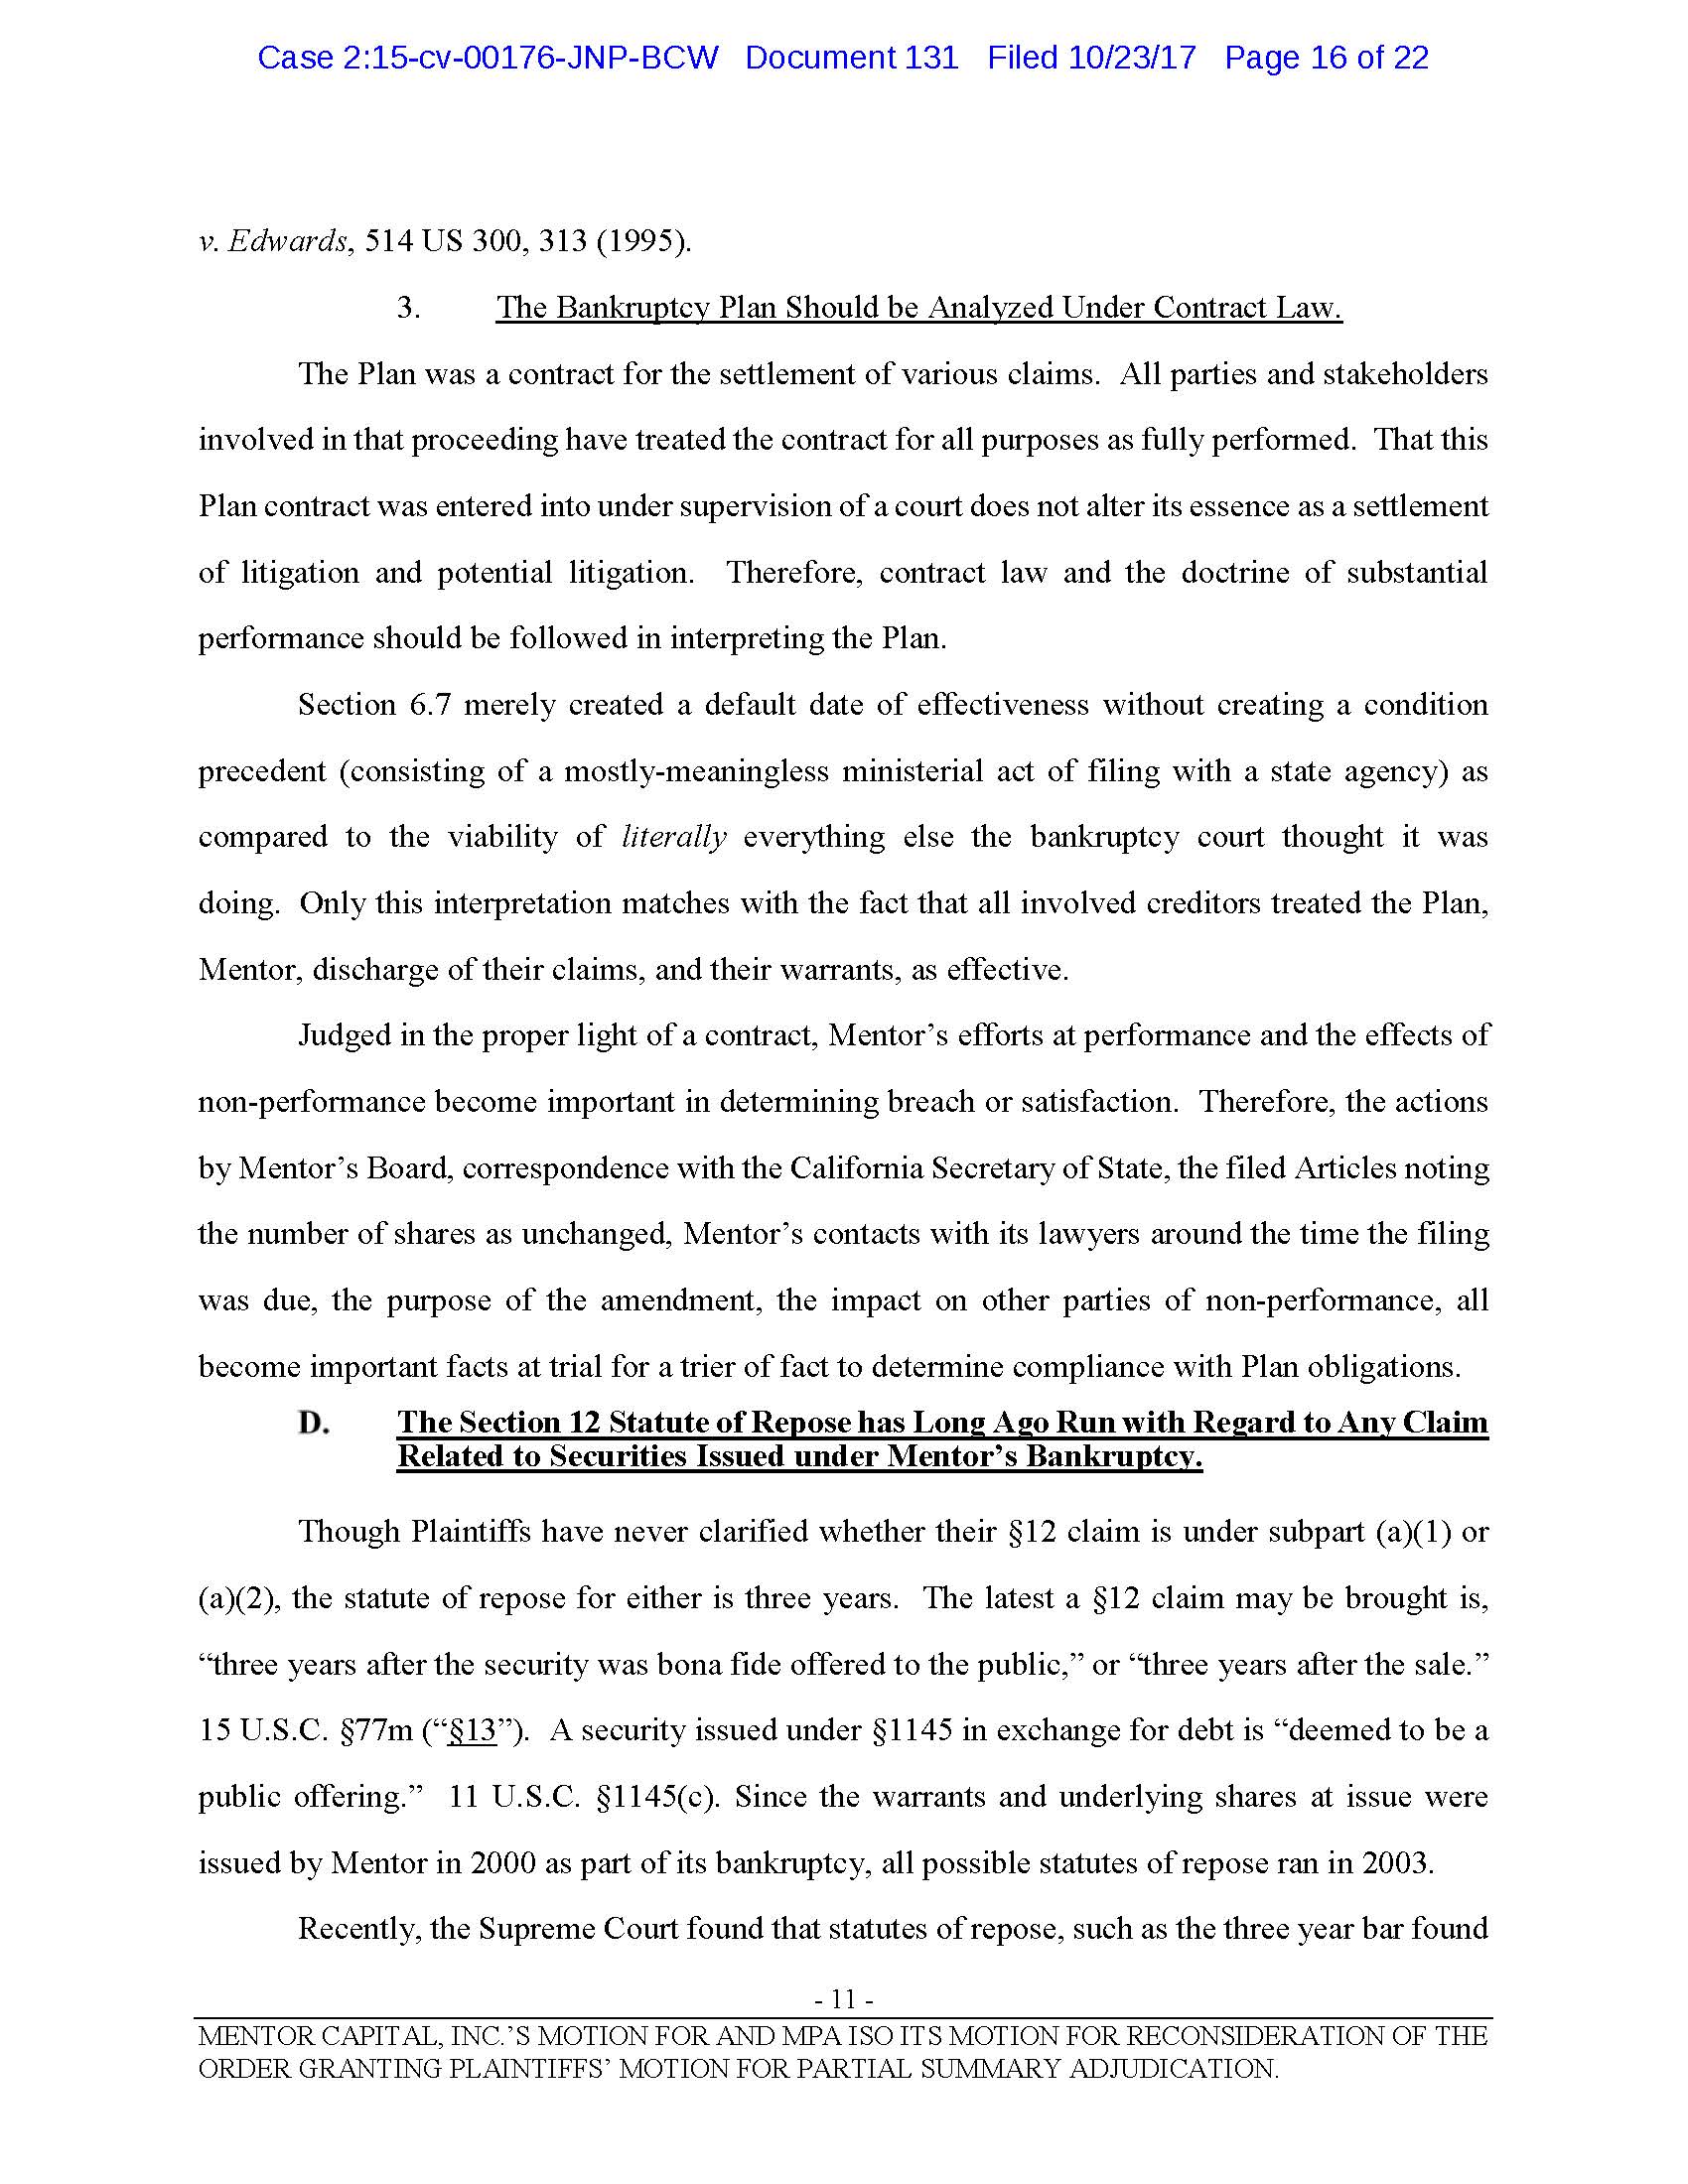 99.1 Motion for Reconsideration_Page_16.jpg